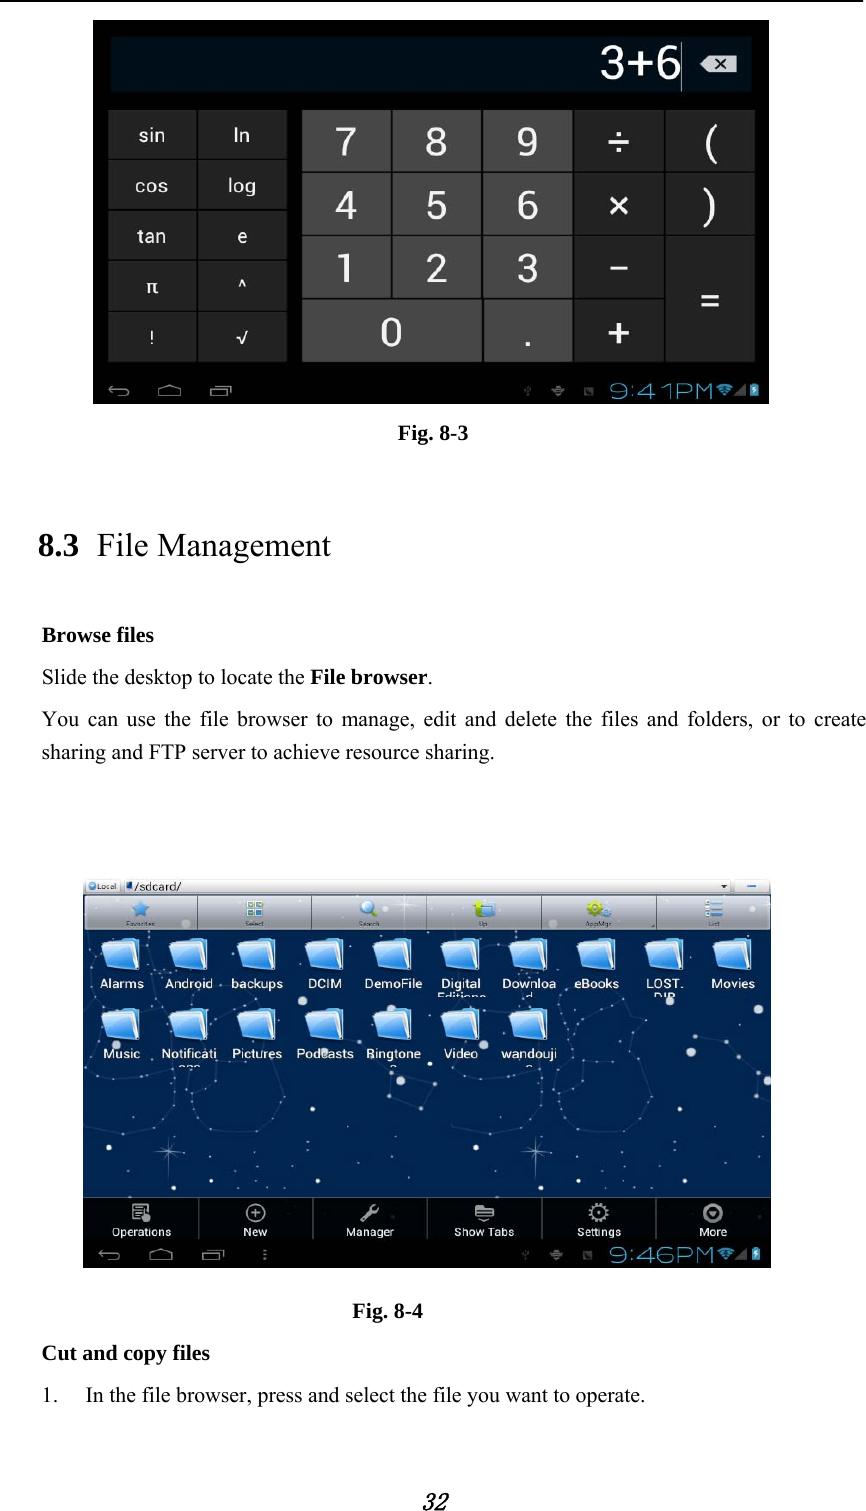     32  Fig. 8-3 8.3 File Management Browse files Slide the desktop to locate the File browser. You can use the file browser to manage, edit and delete the files and folders, or to create sharing and FTP server to achieve resource sharing.    Fig. 8-4 Cut and copy files 1. In the file browser, press and select the file you want to operate. 